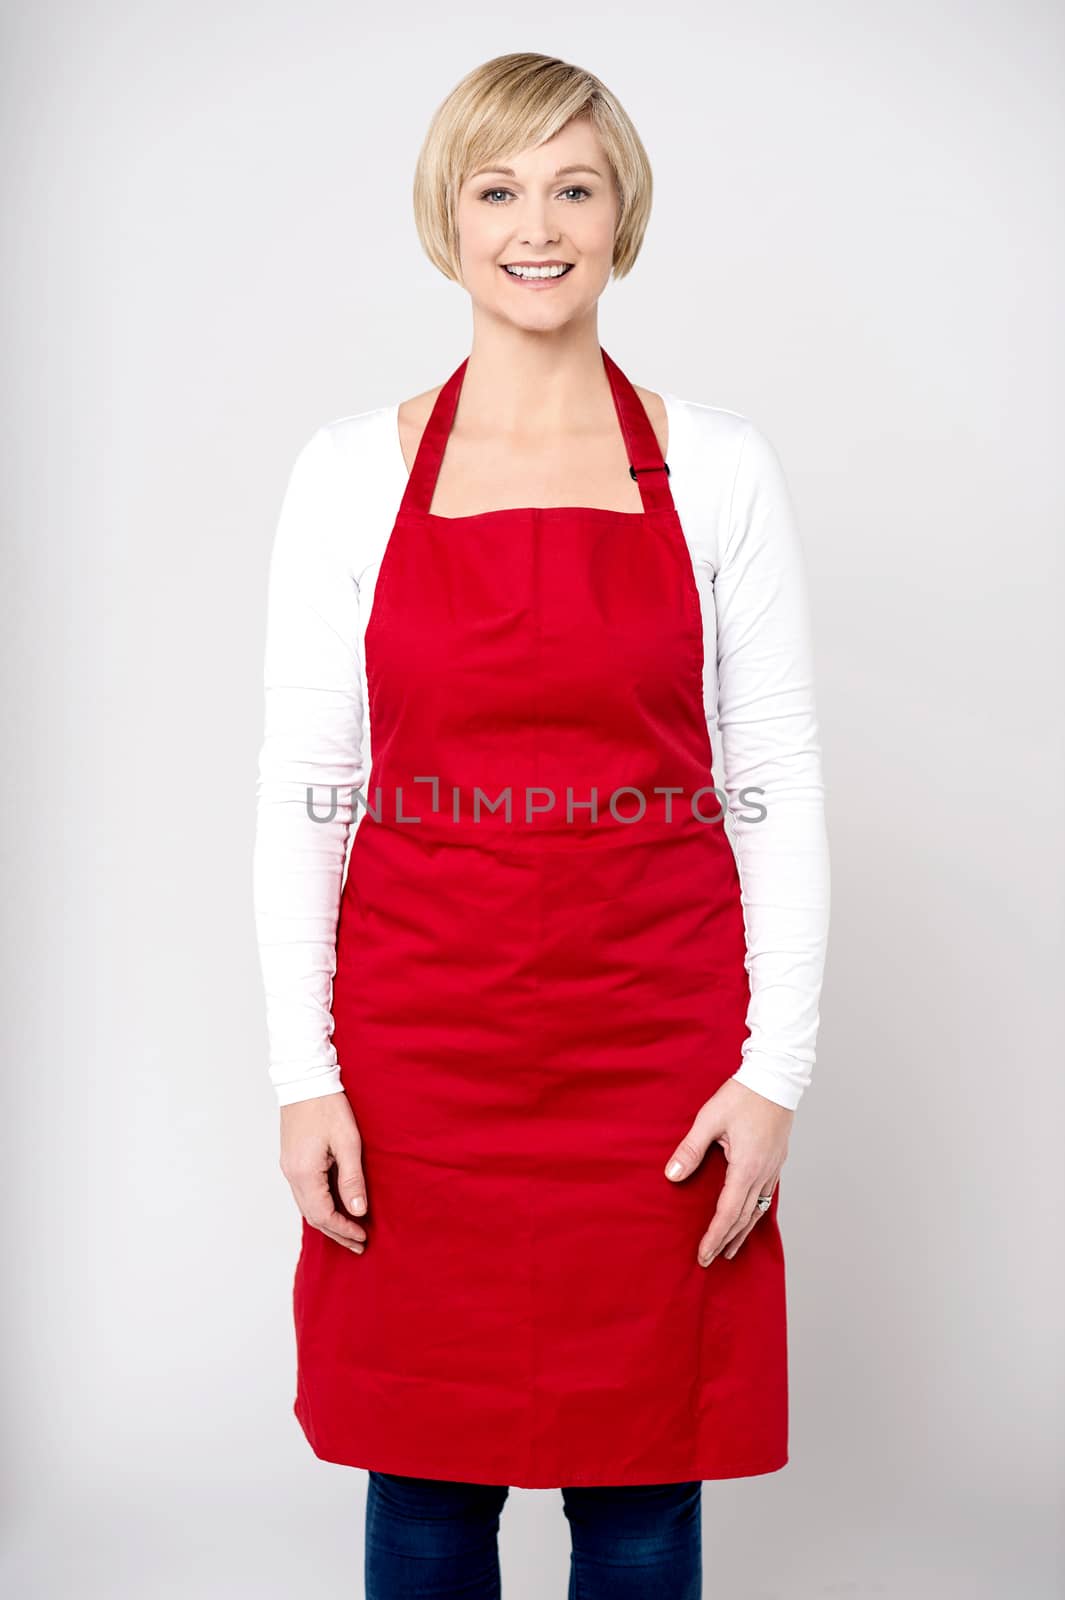 Casual pose of happy female chef by stockyimages